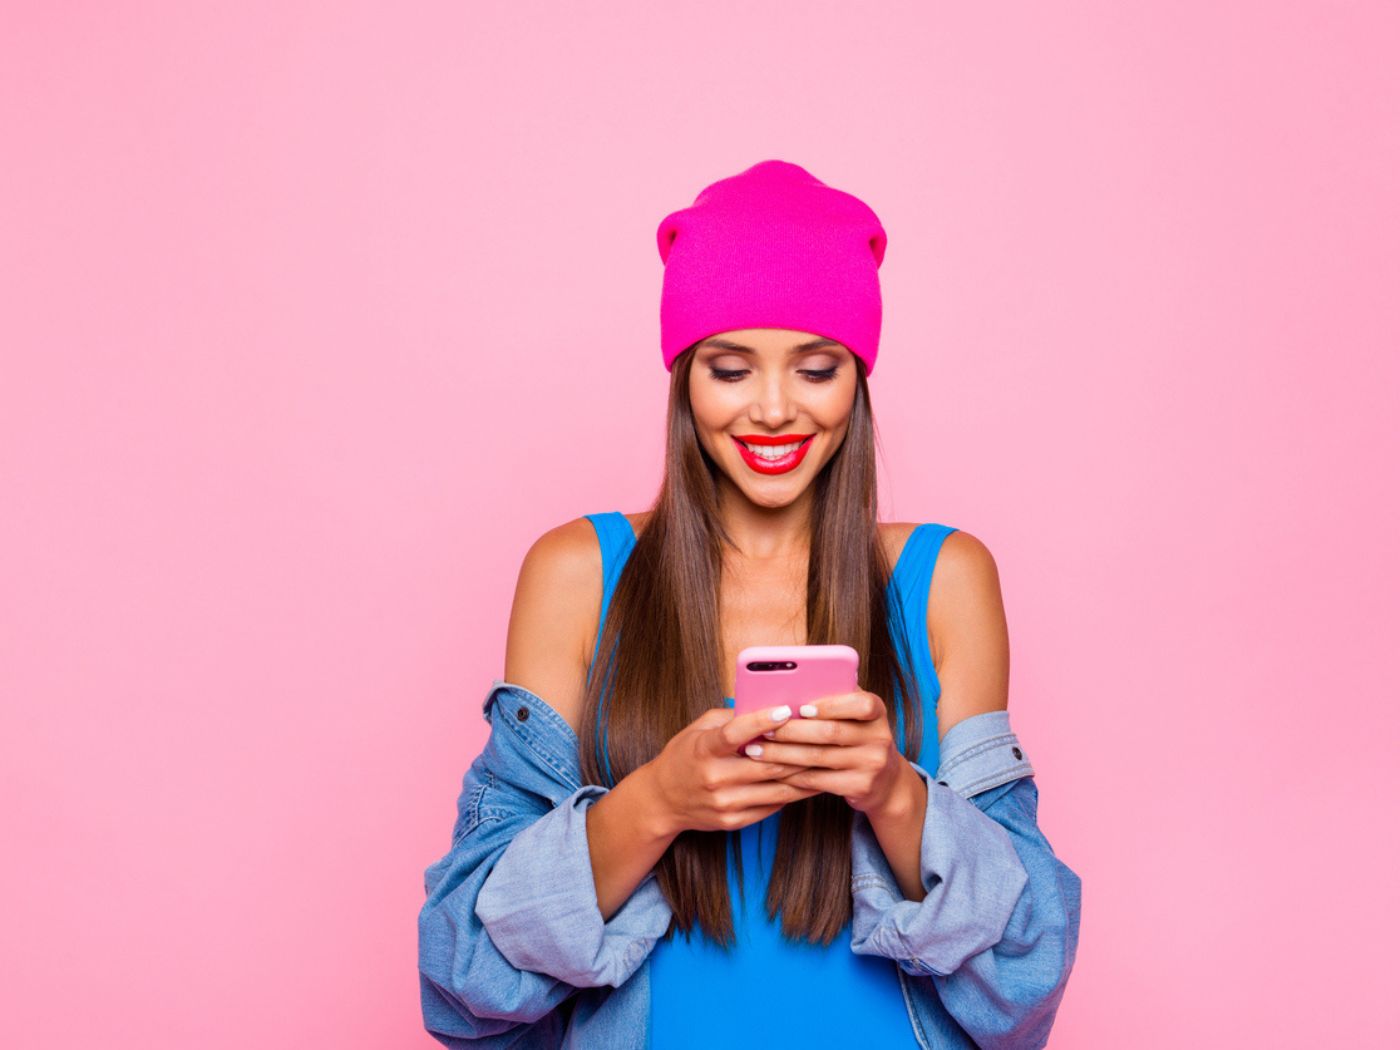 Woman in denim jacket with long hair and a beanie smiling while on her cell phone